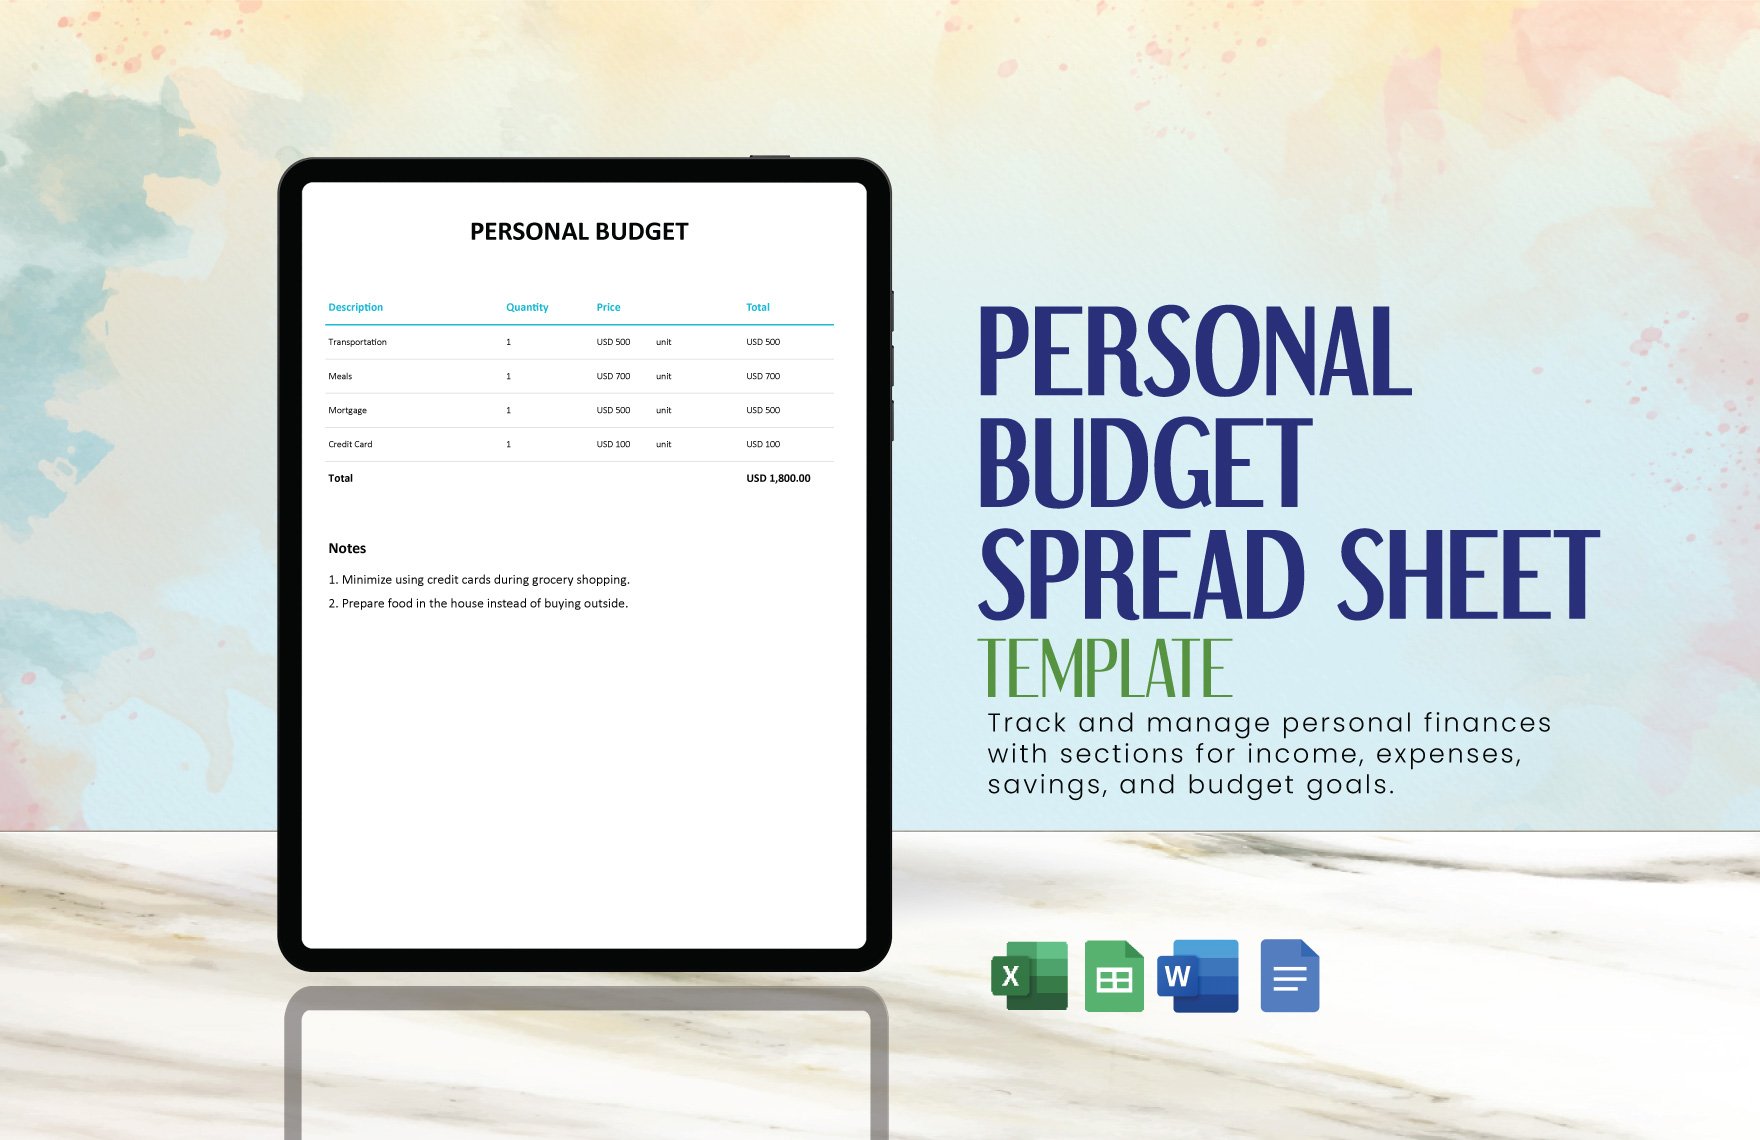 Personal Budget Spread sheet Template in Word, Google Docs, Excel, Google Sheets